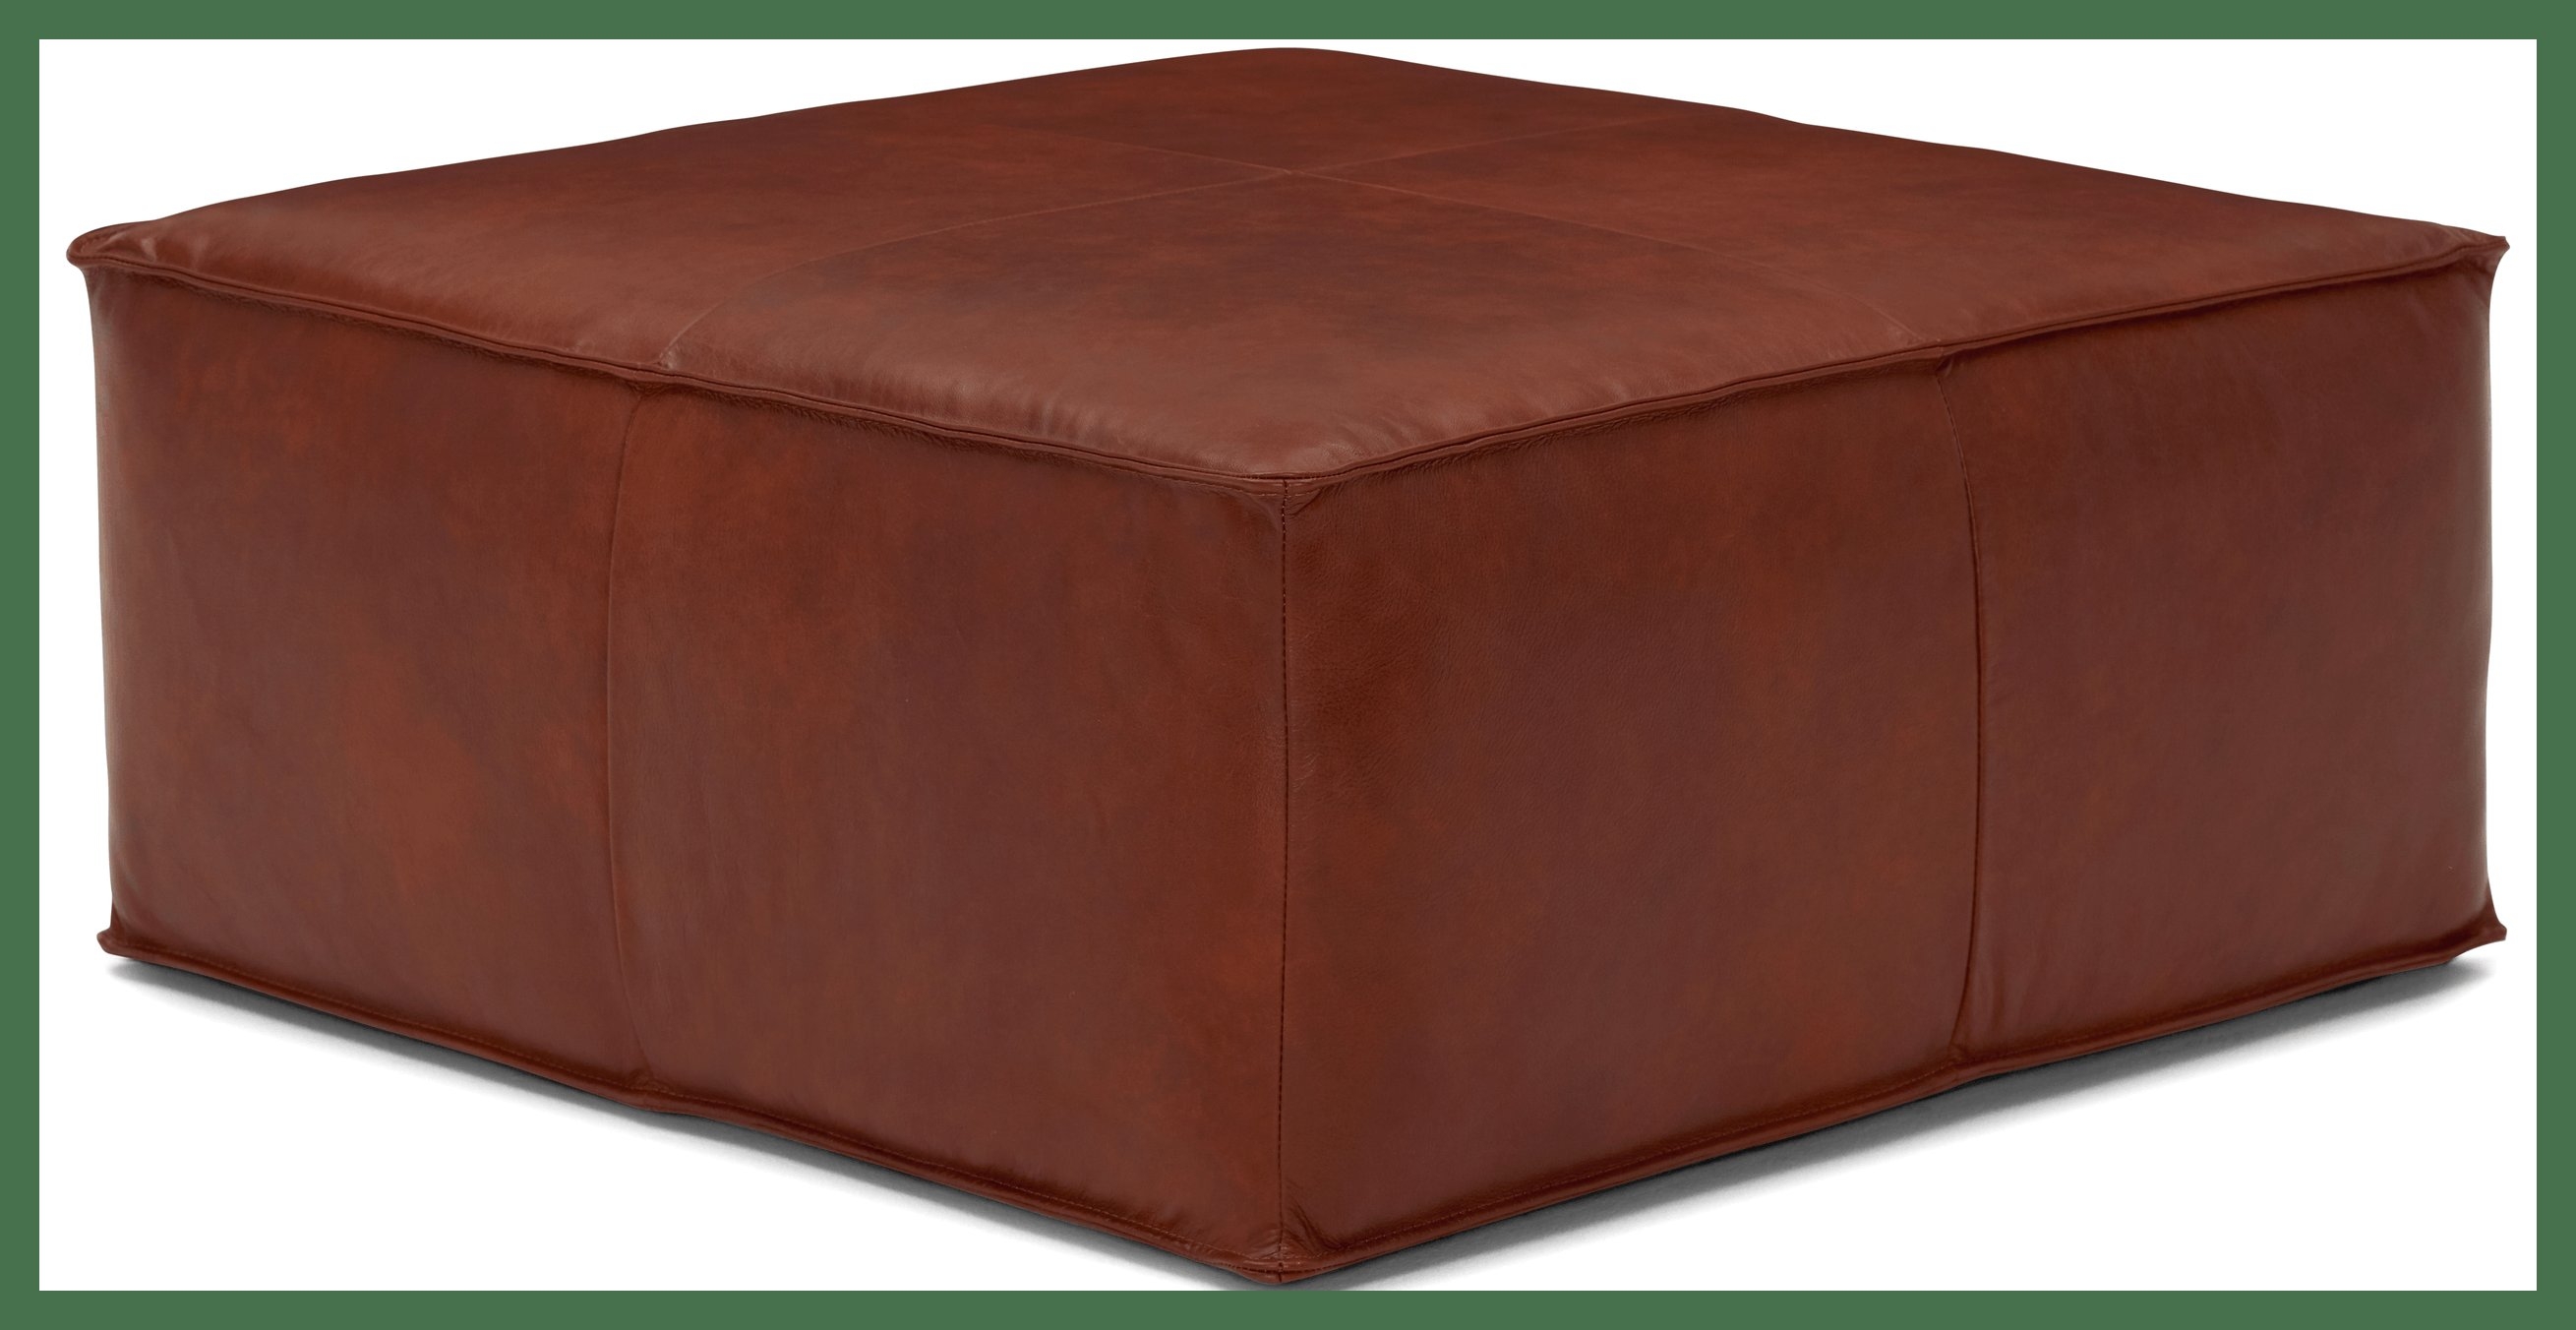 Lyle Mid Century Modern Leather Ottoman - Olympia Camel - Image 1